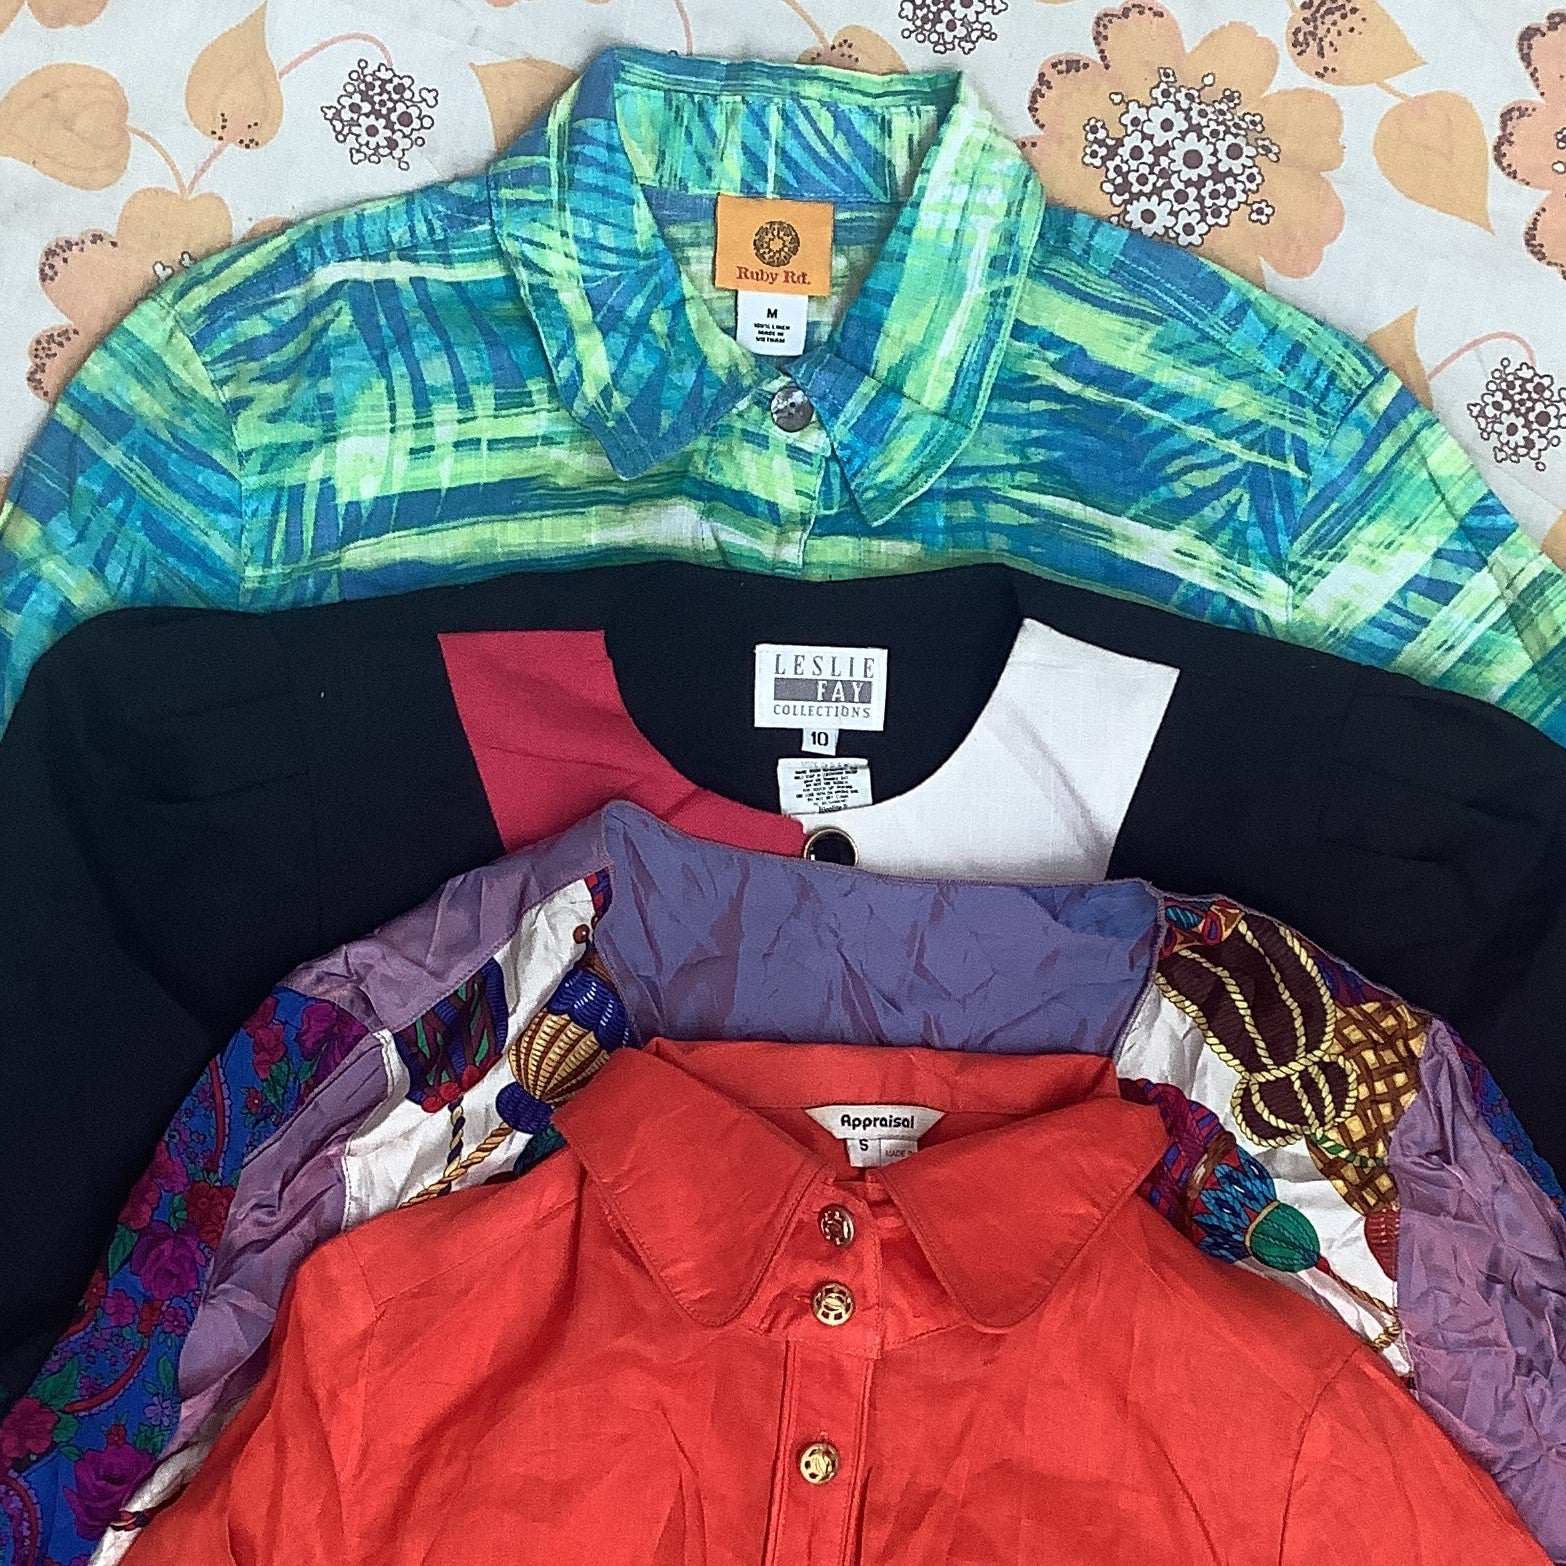 Wholesale vintage and secondhand mixed bundles of ladies blazers and jackets. Choose from Grade A, B or ungraded to bulk buy per kilo, piece or bale. Handpick available in Sussex warehouse of Brighton's biggest vintage retailer or shop at monthly kilo sale events.